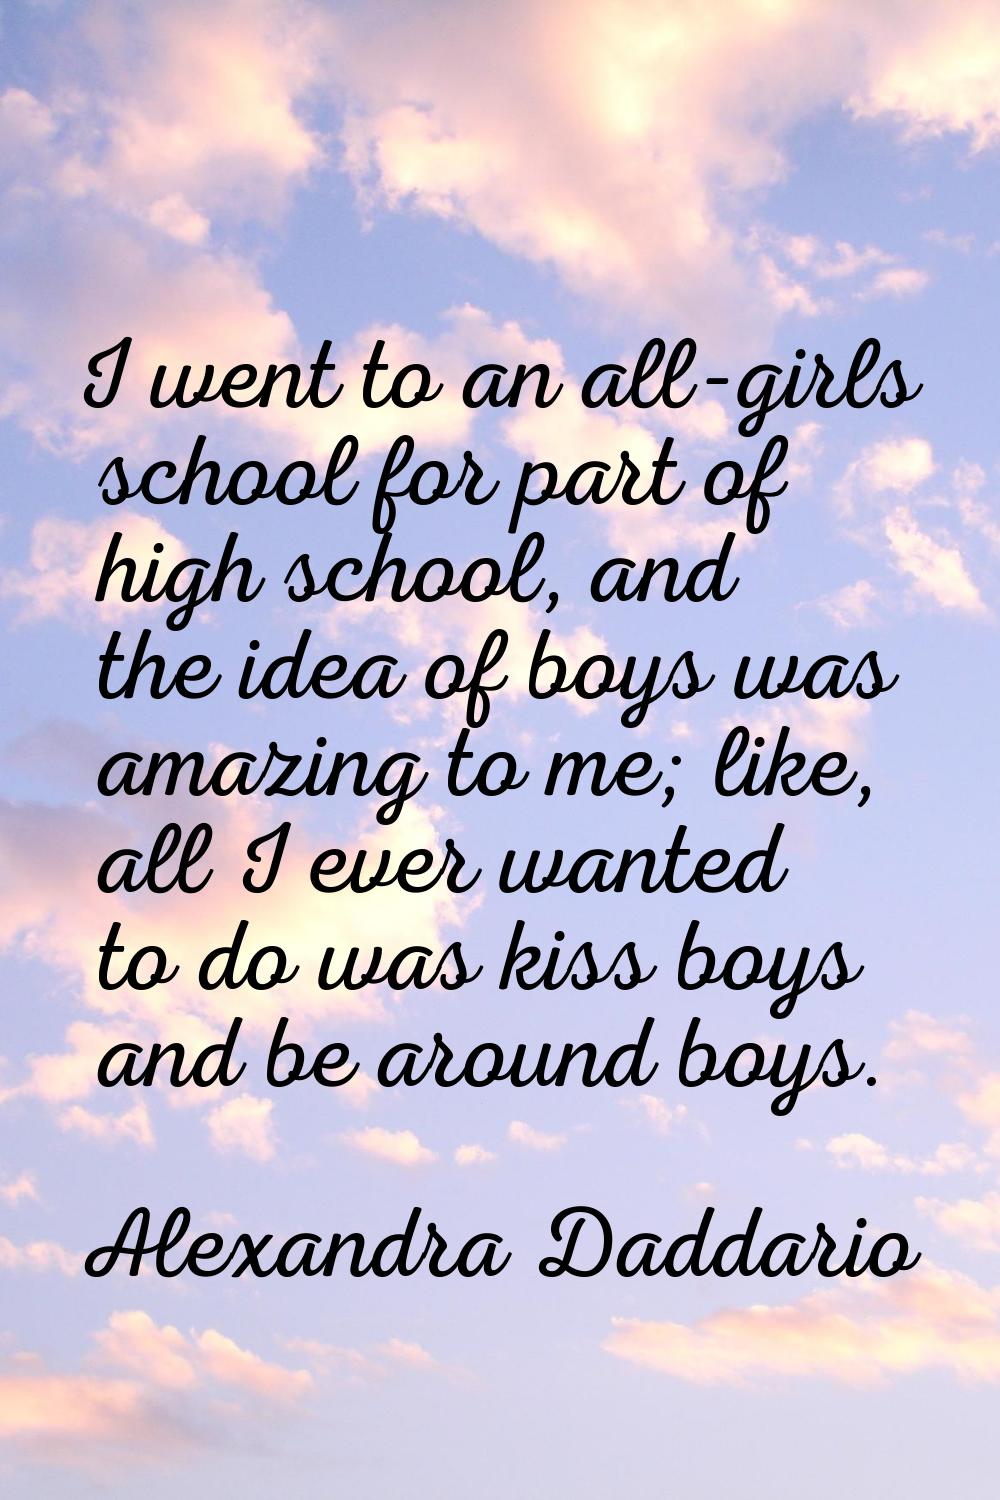 I went to an all-girls school for part of high school, and the idea of boys was amazing to me; like